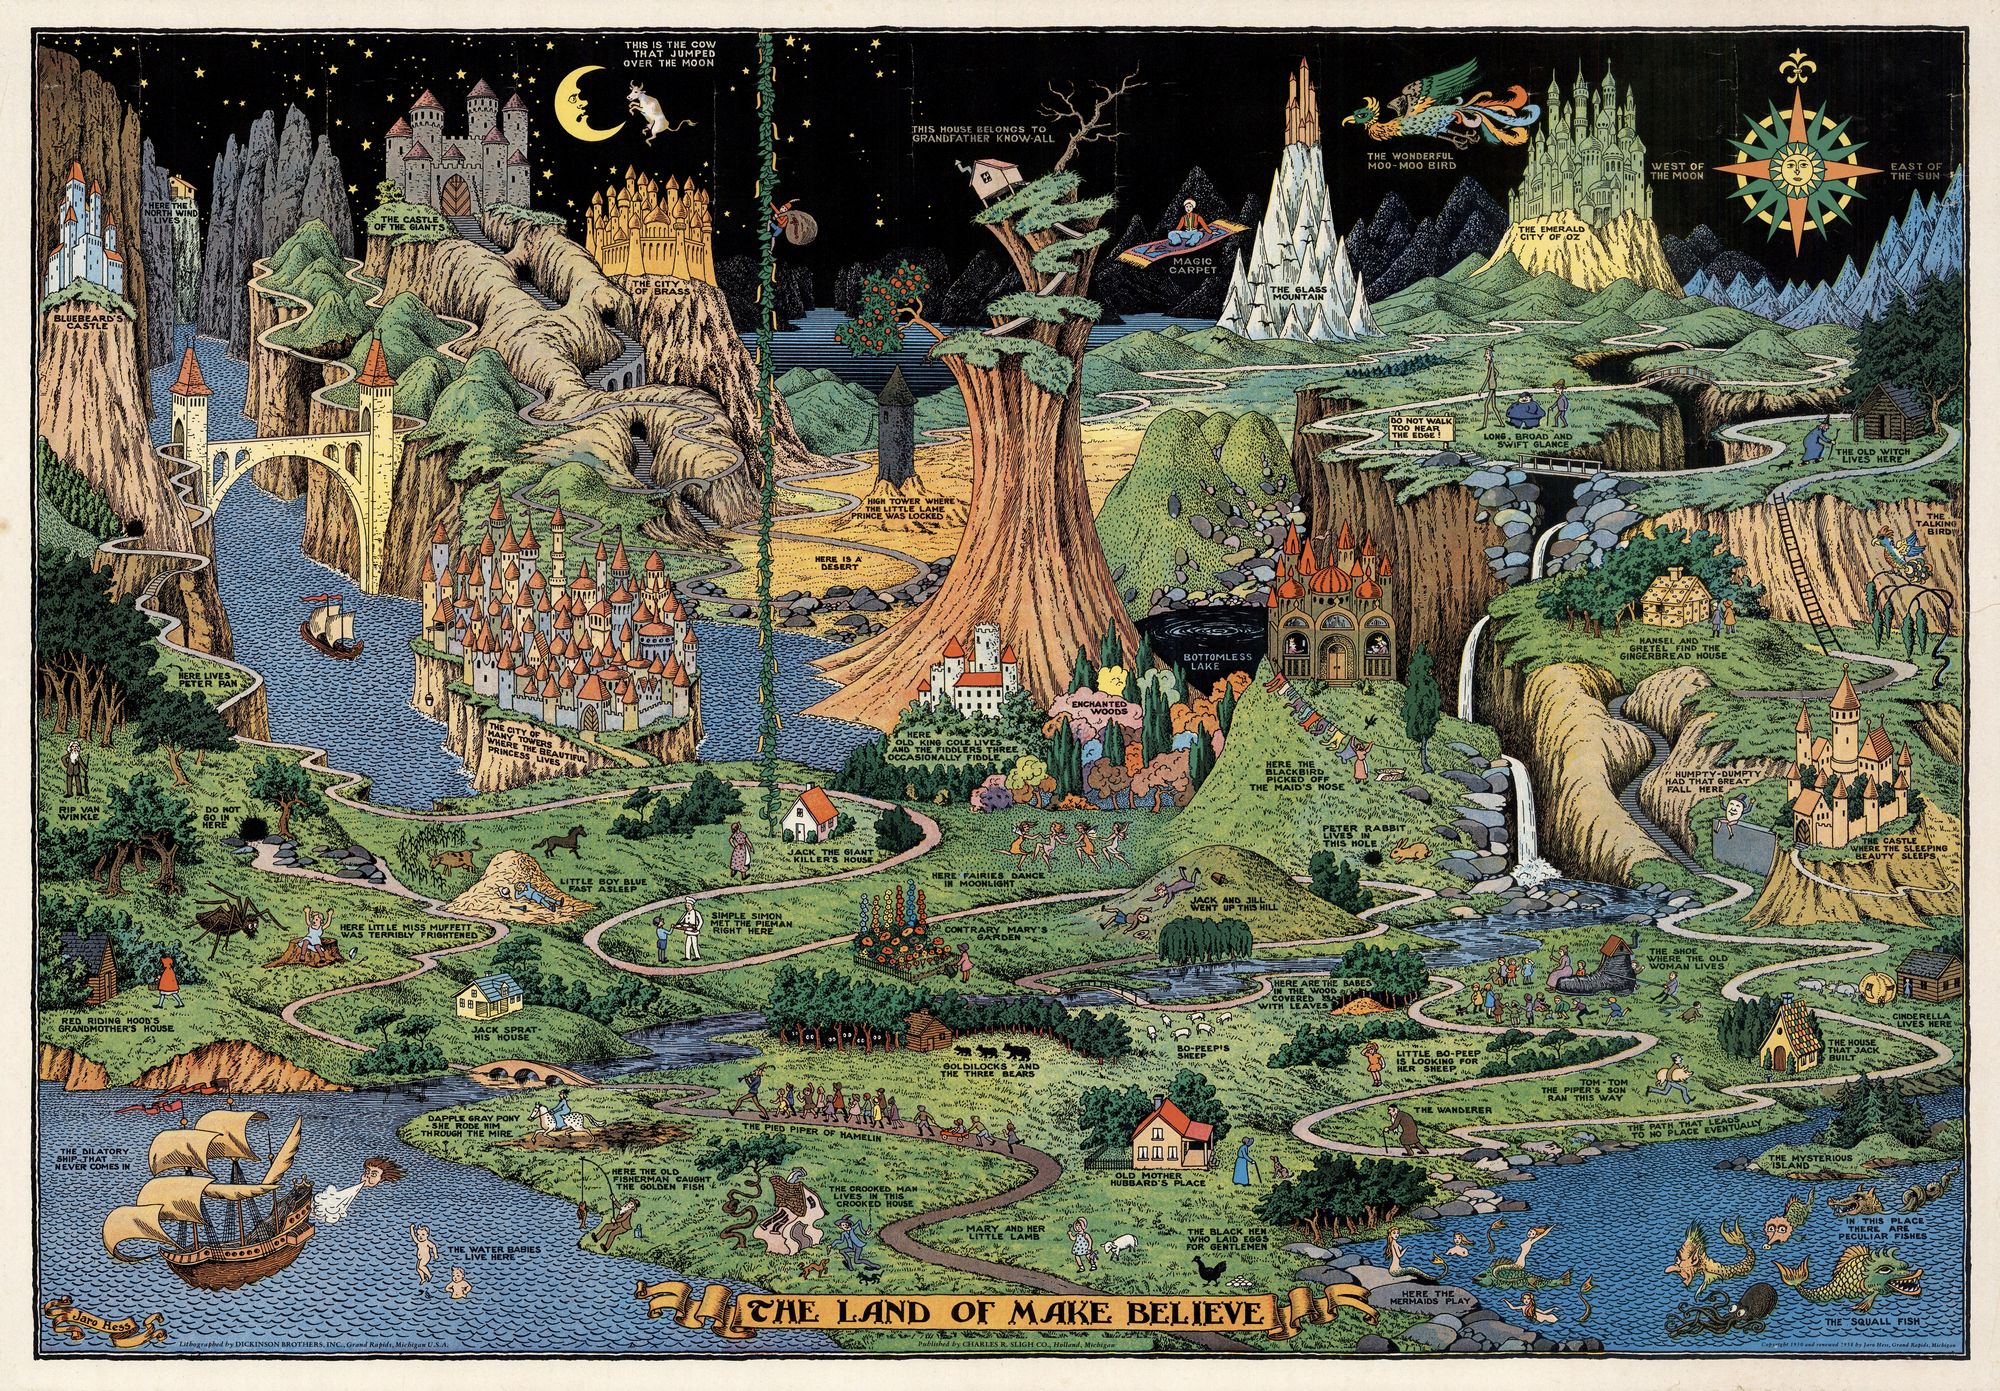 The Land of Make Believe by Jaro Hess, 1930